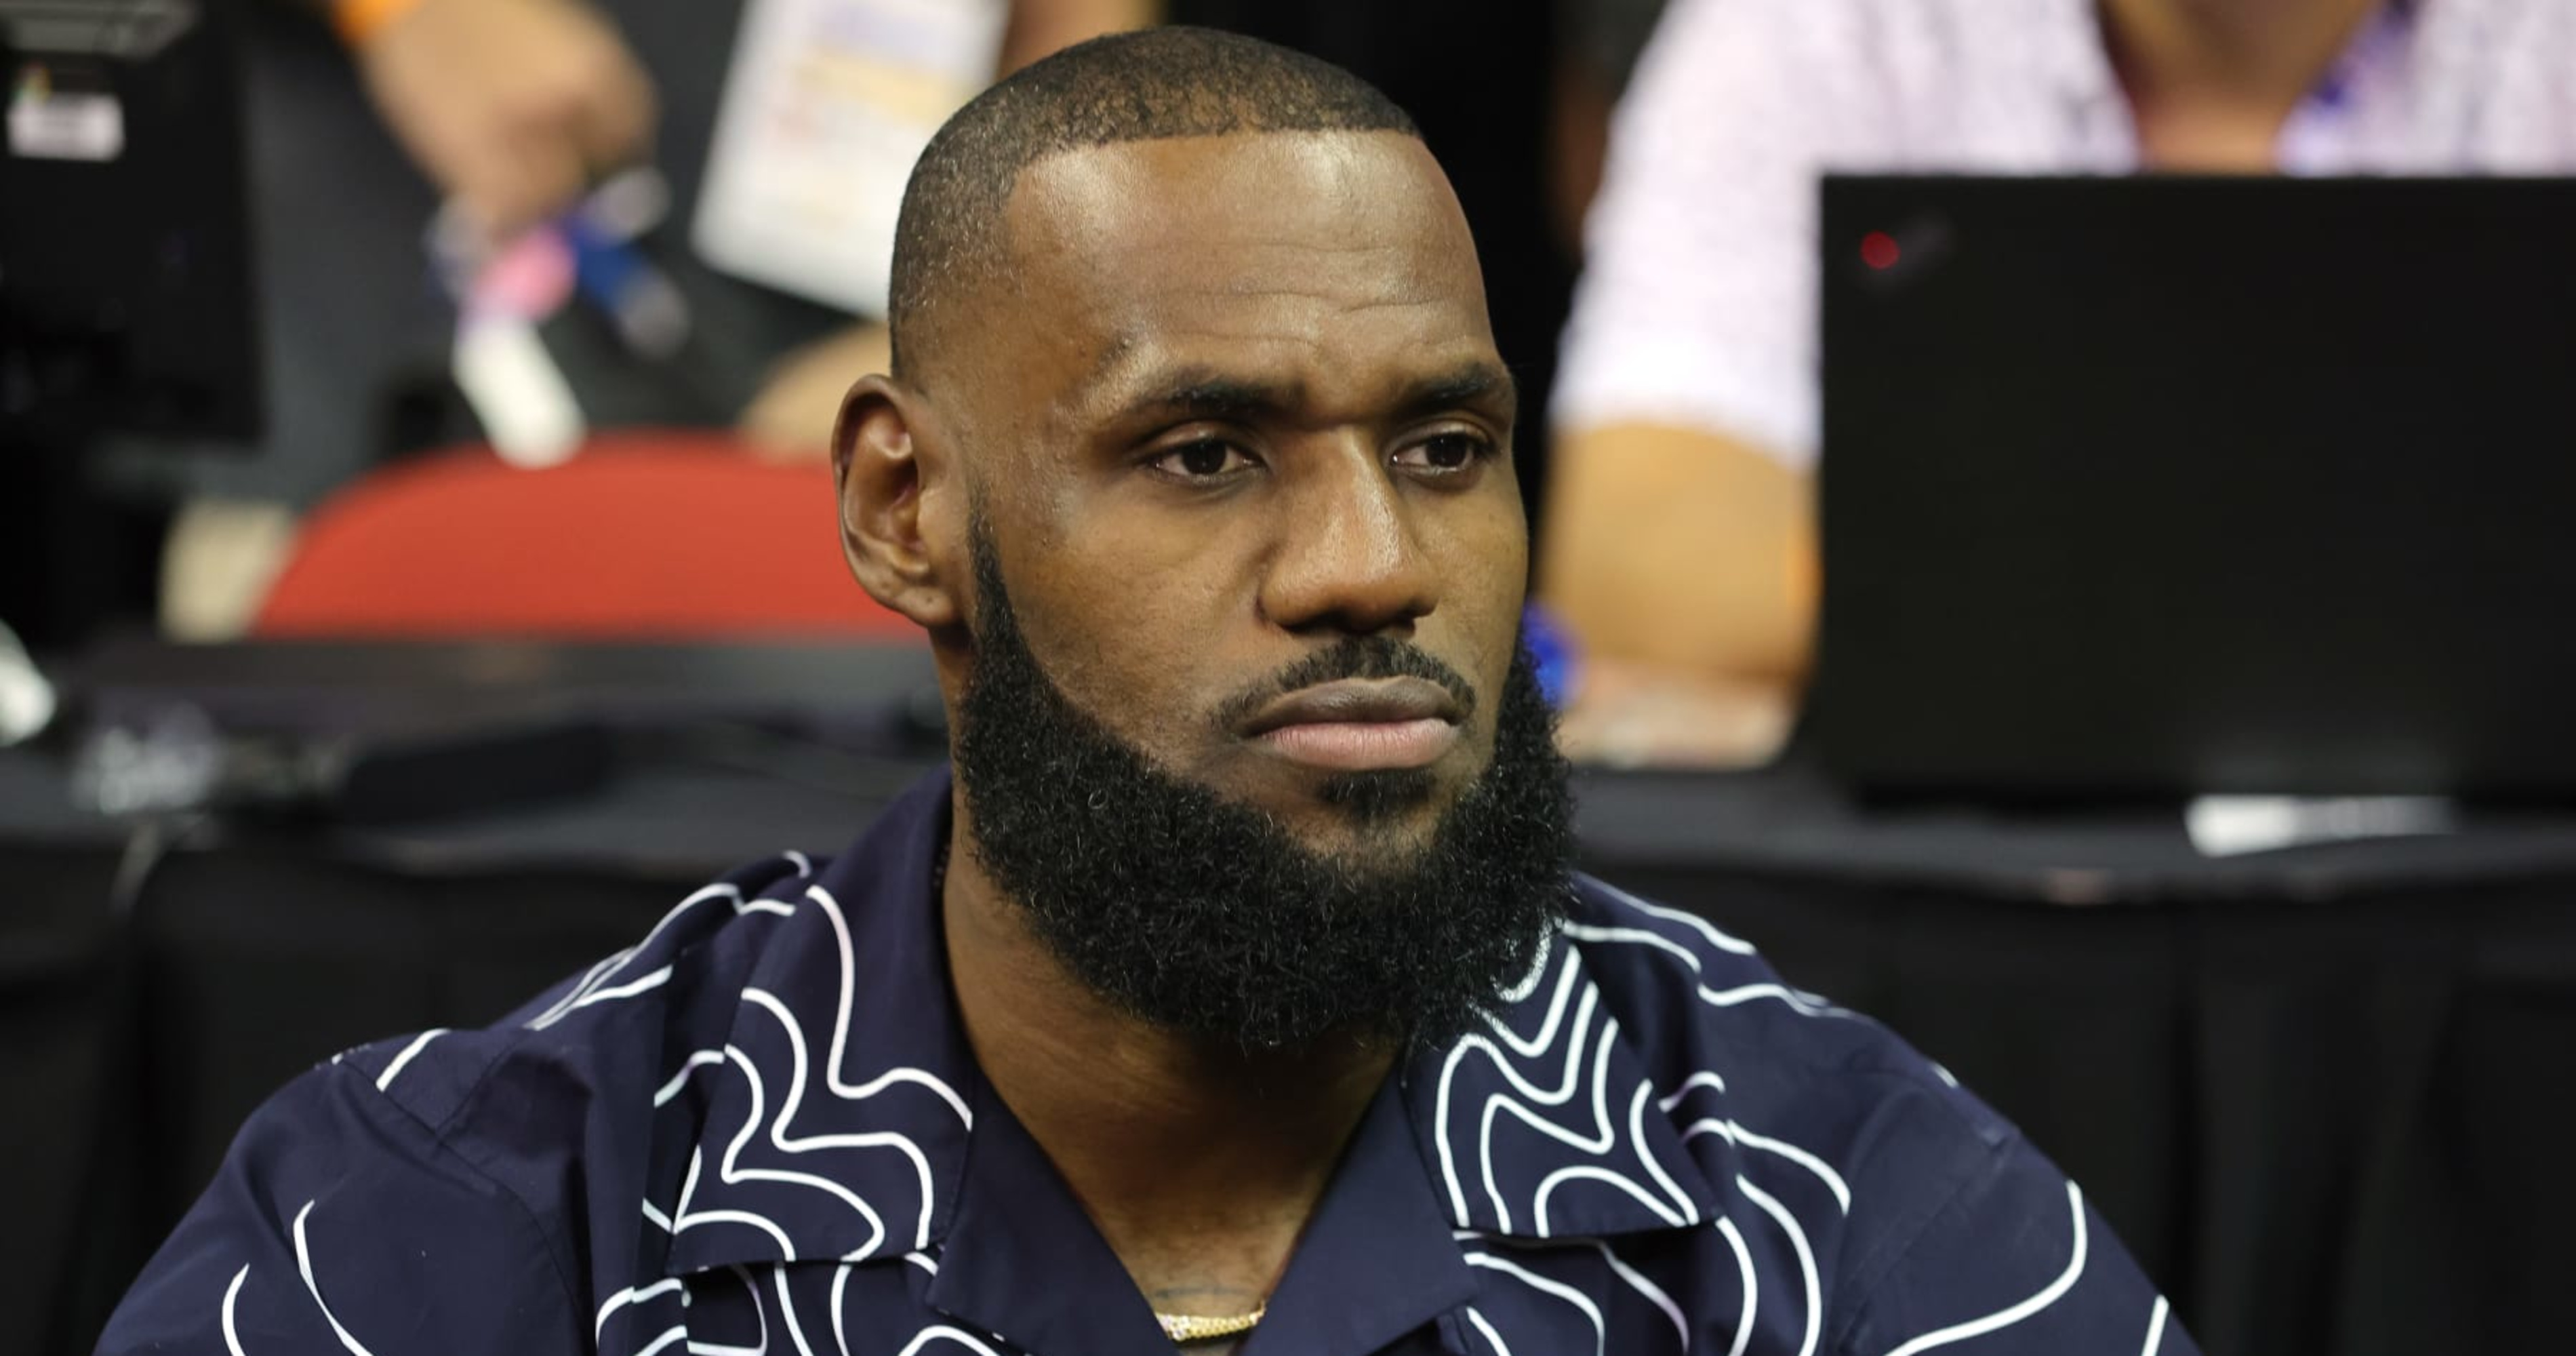 Lakers Rumors: LeBron James Met with Front Office to Discuss Concerns, Strategy